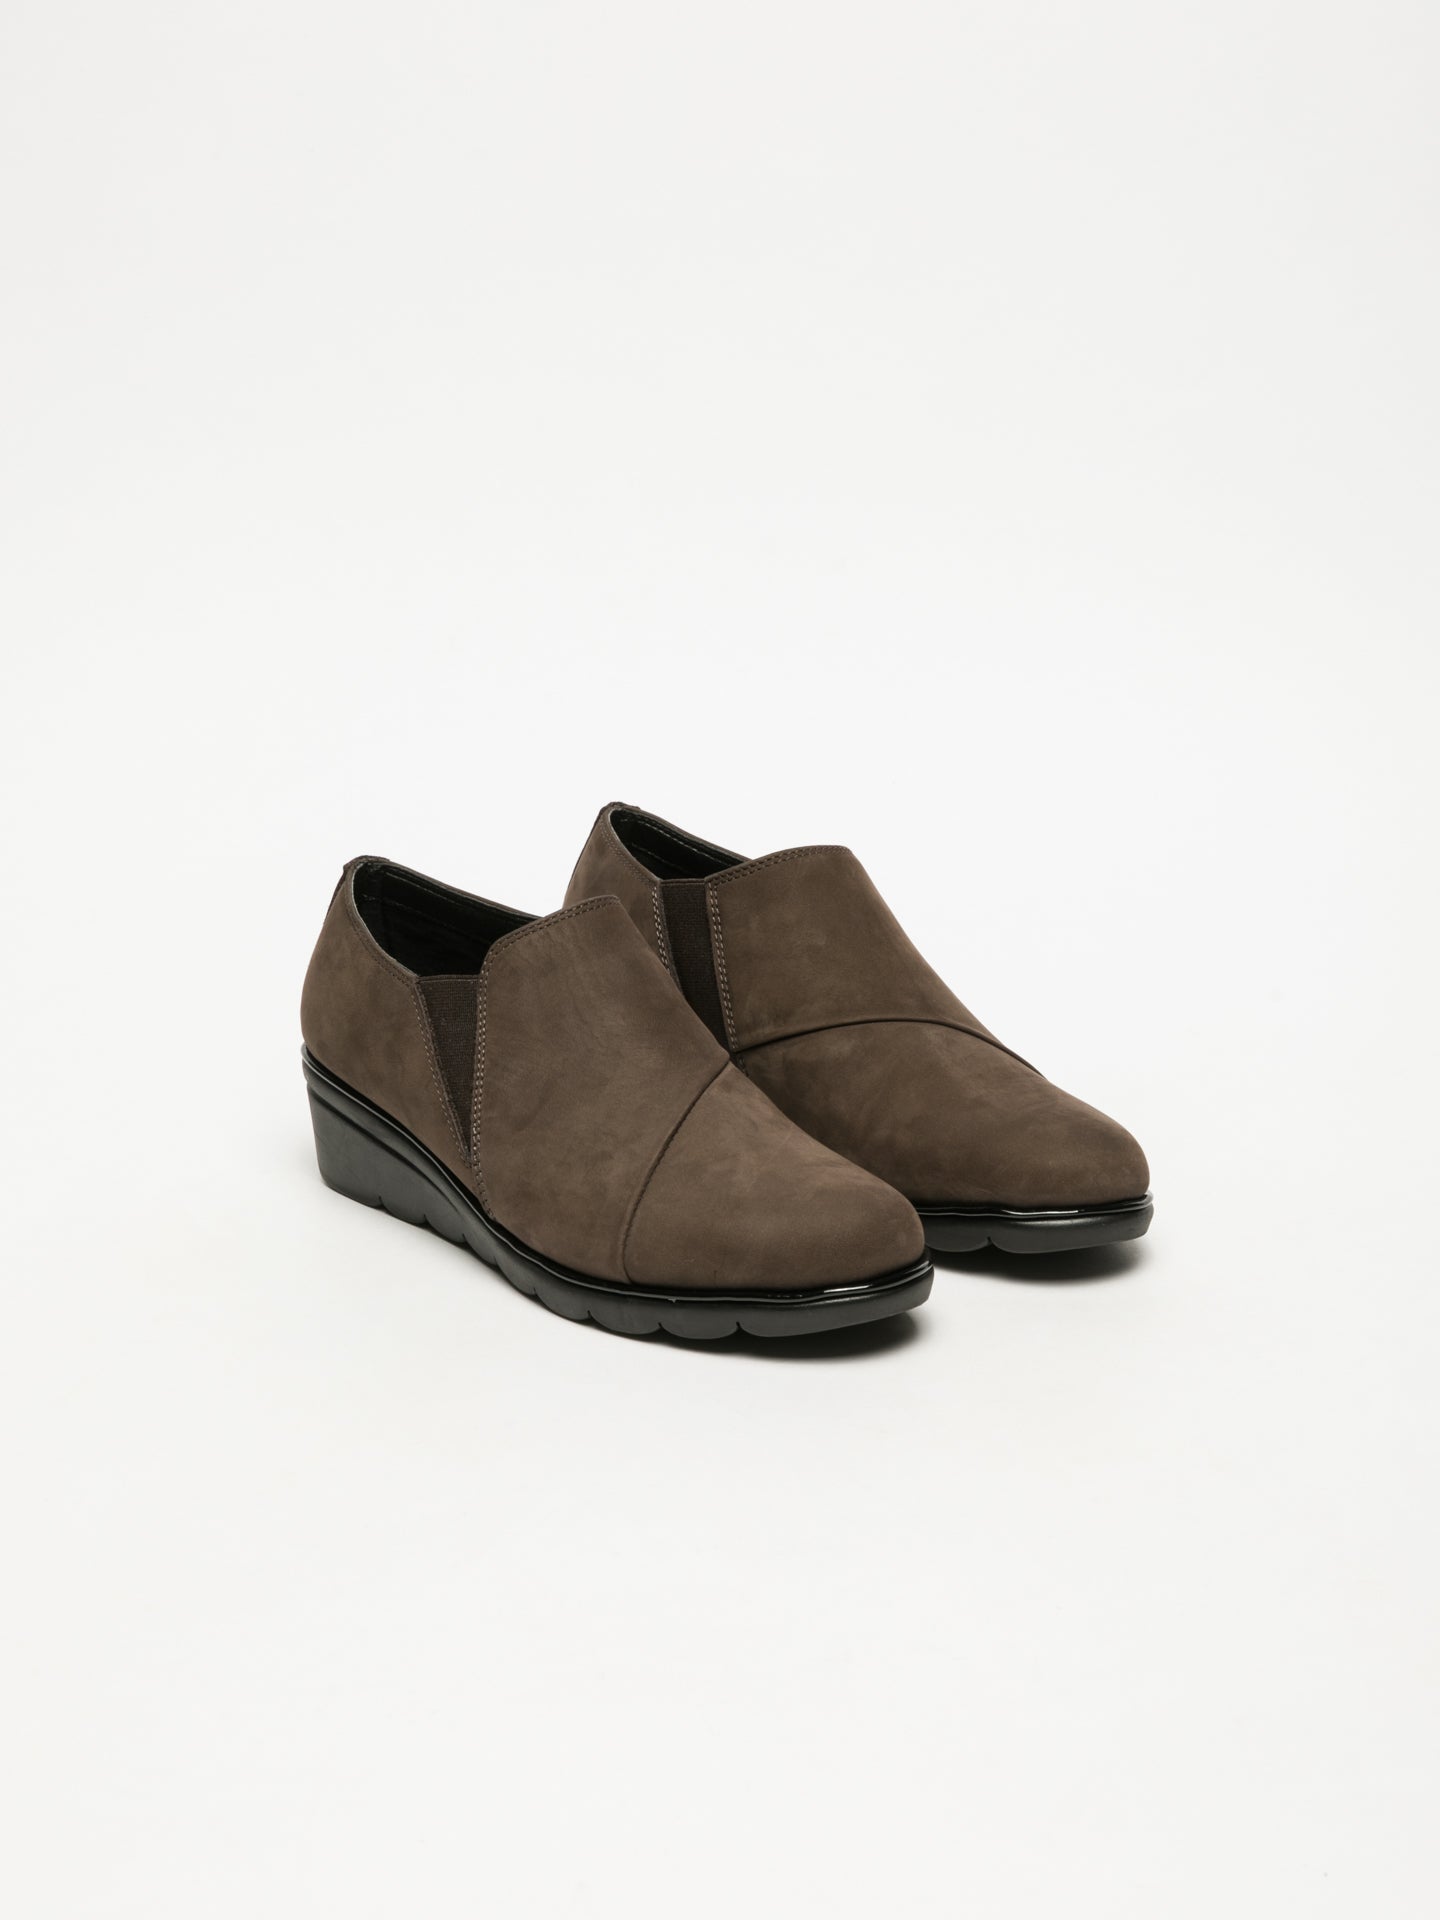 The Flexx Brown Round Toe Shoes